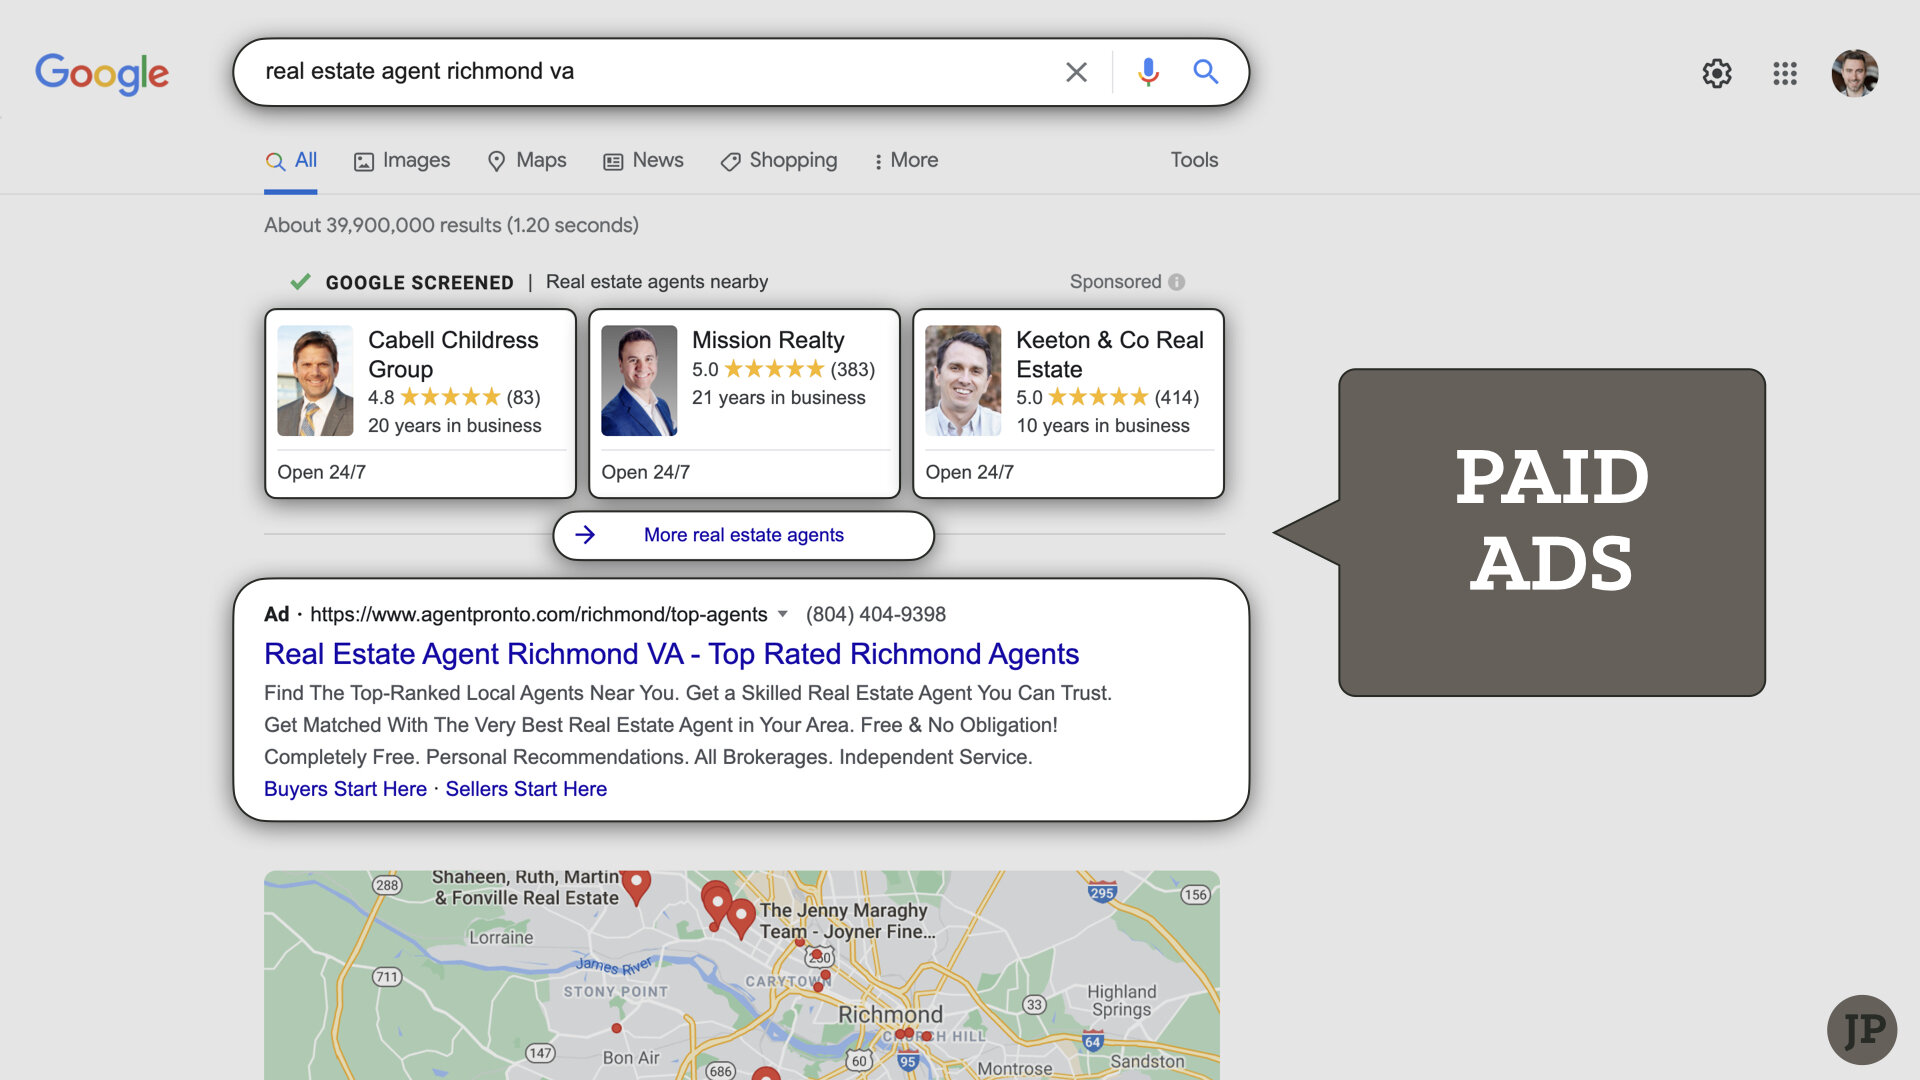 Google My Business Profile Tips for Real Estate Agents 2021.002.jpeg